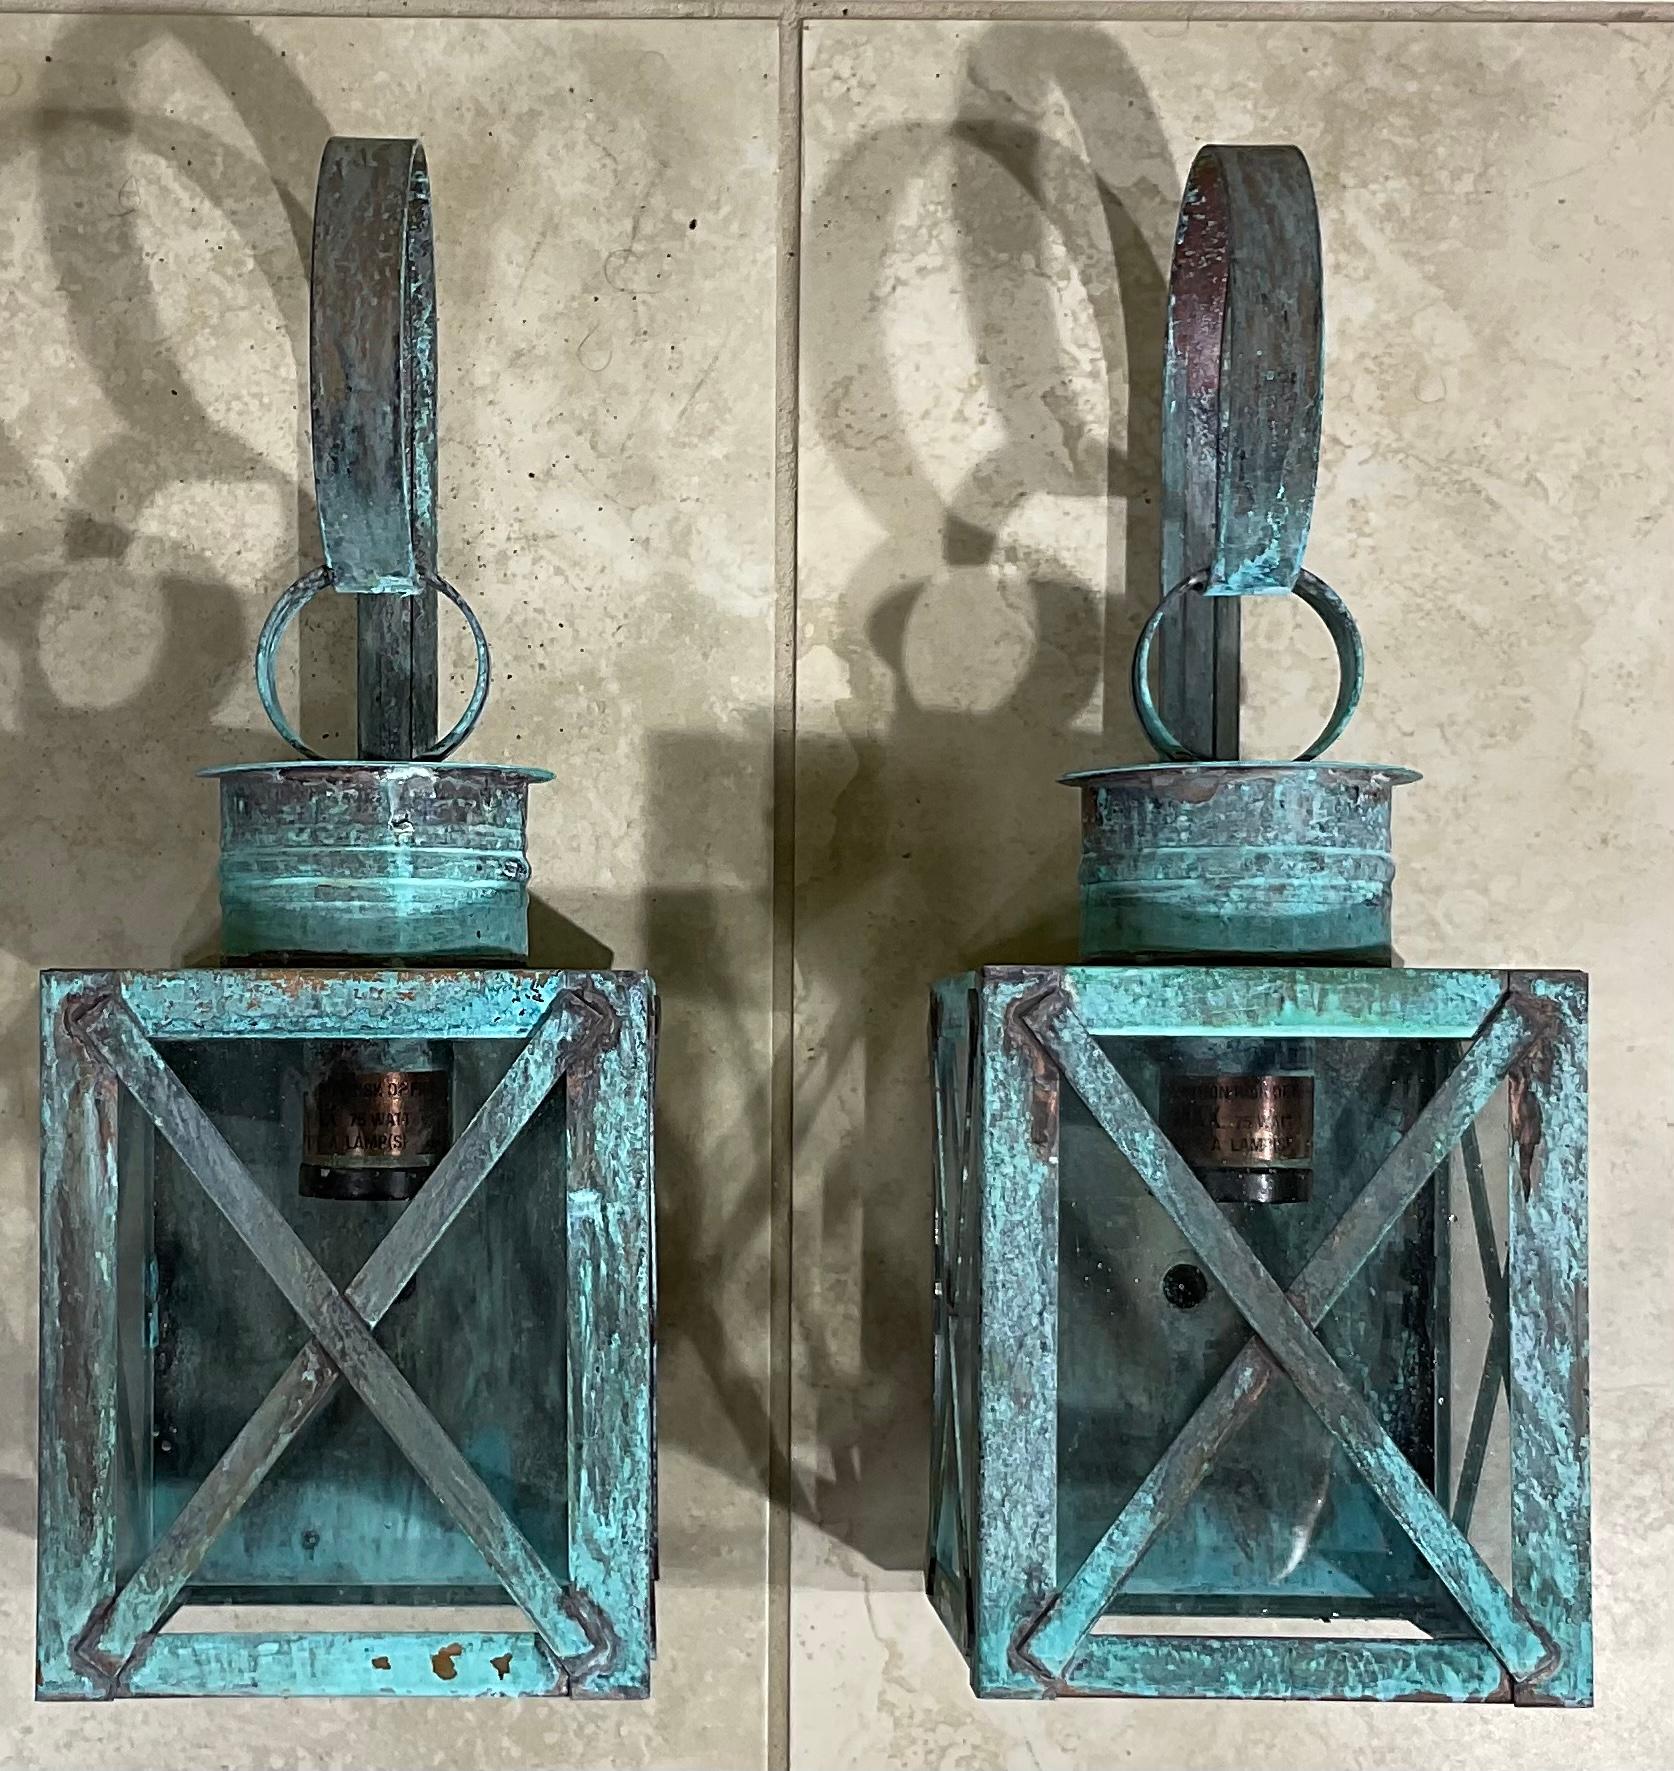 Pair of wall lantern made of solid copper, protective X bars, weathered patina, with one 75/watt light each. Suitable for wet locations. UL approved, up to US code, ready to use.
Fine quality, made in the USA.